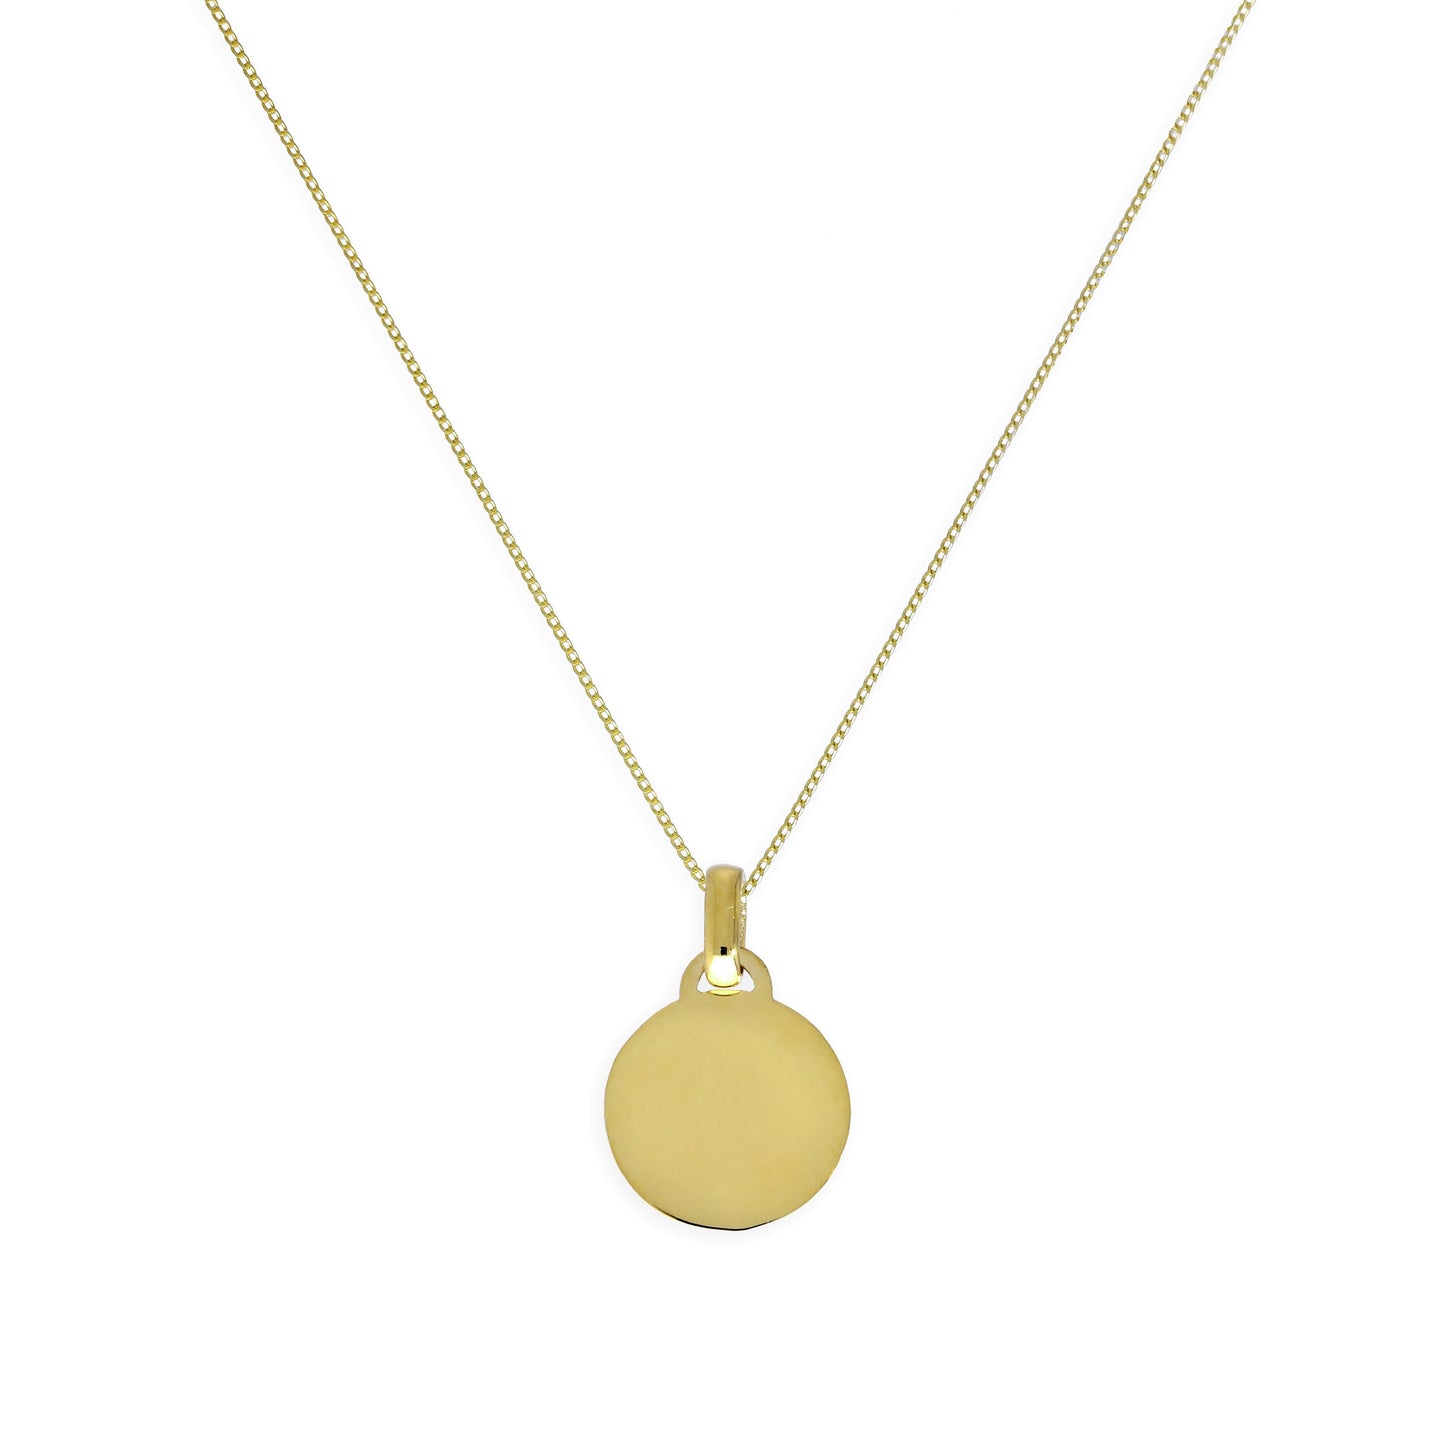 9ct Gold Small Engravable Circle Pendant Necklace 16 - 20 Inches